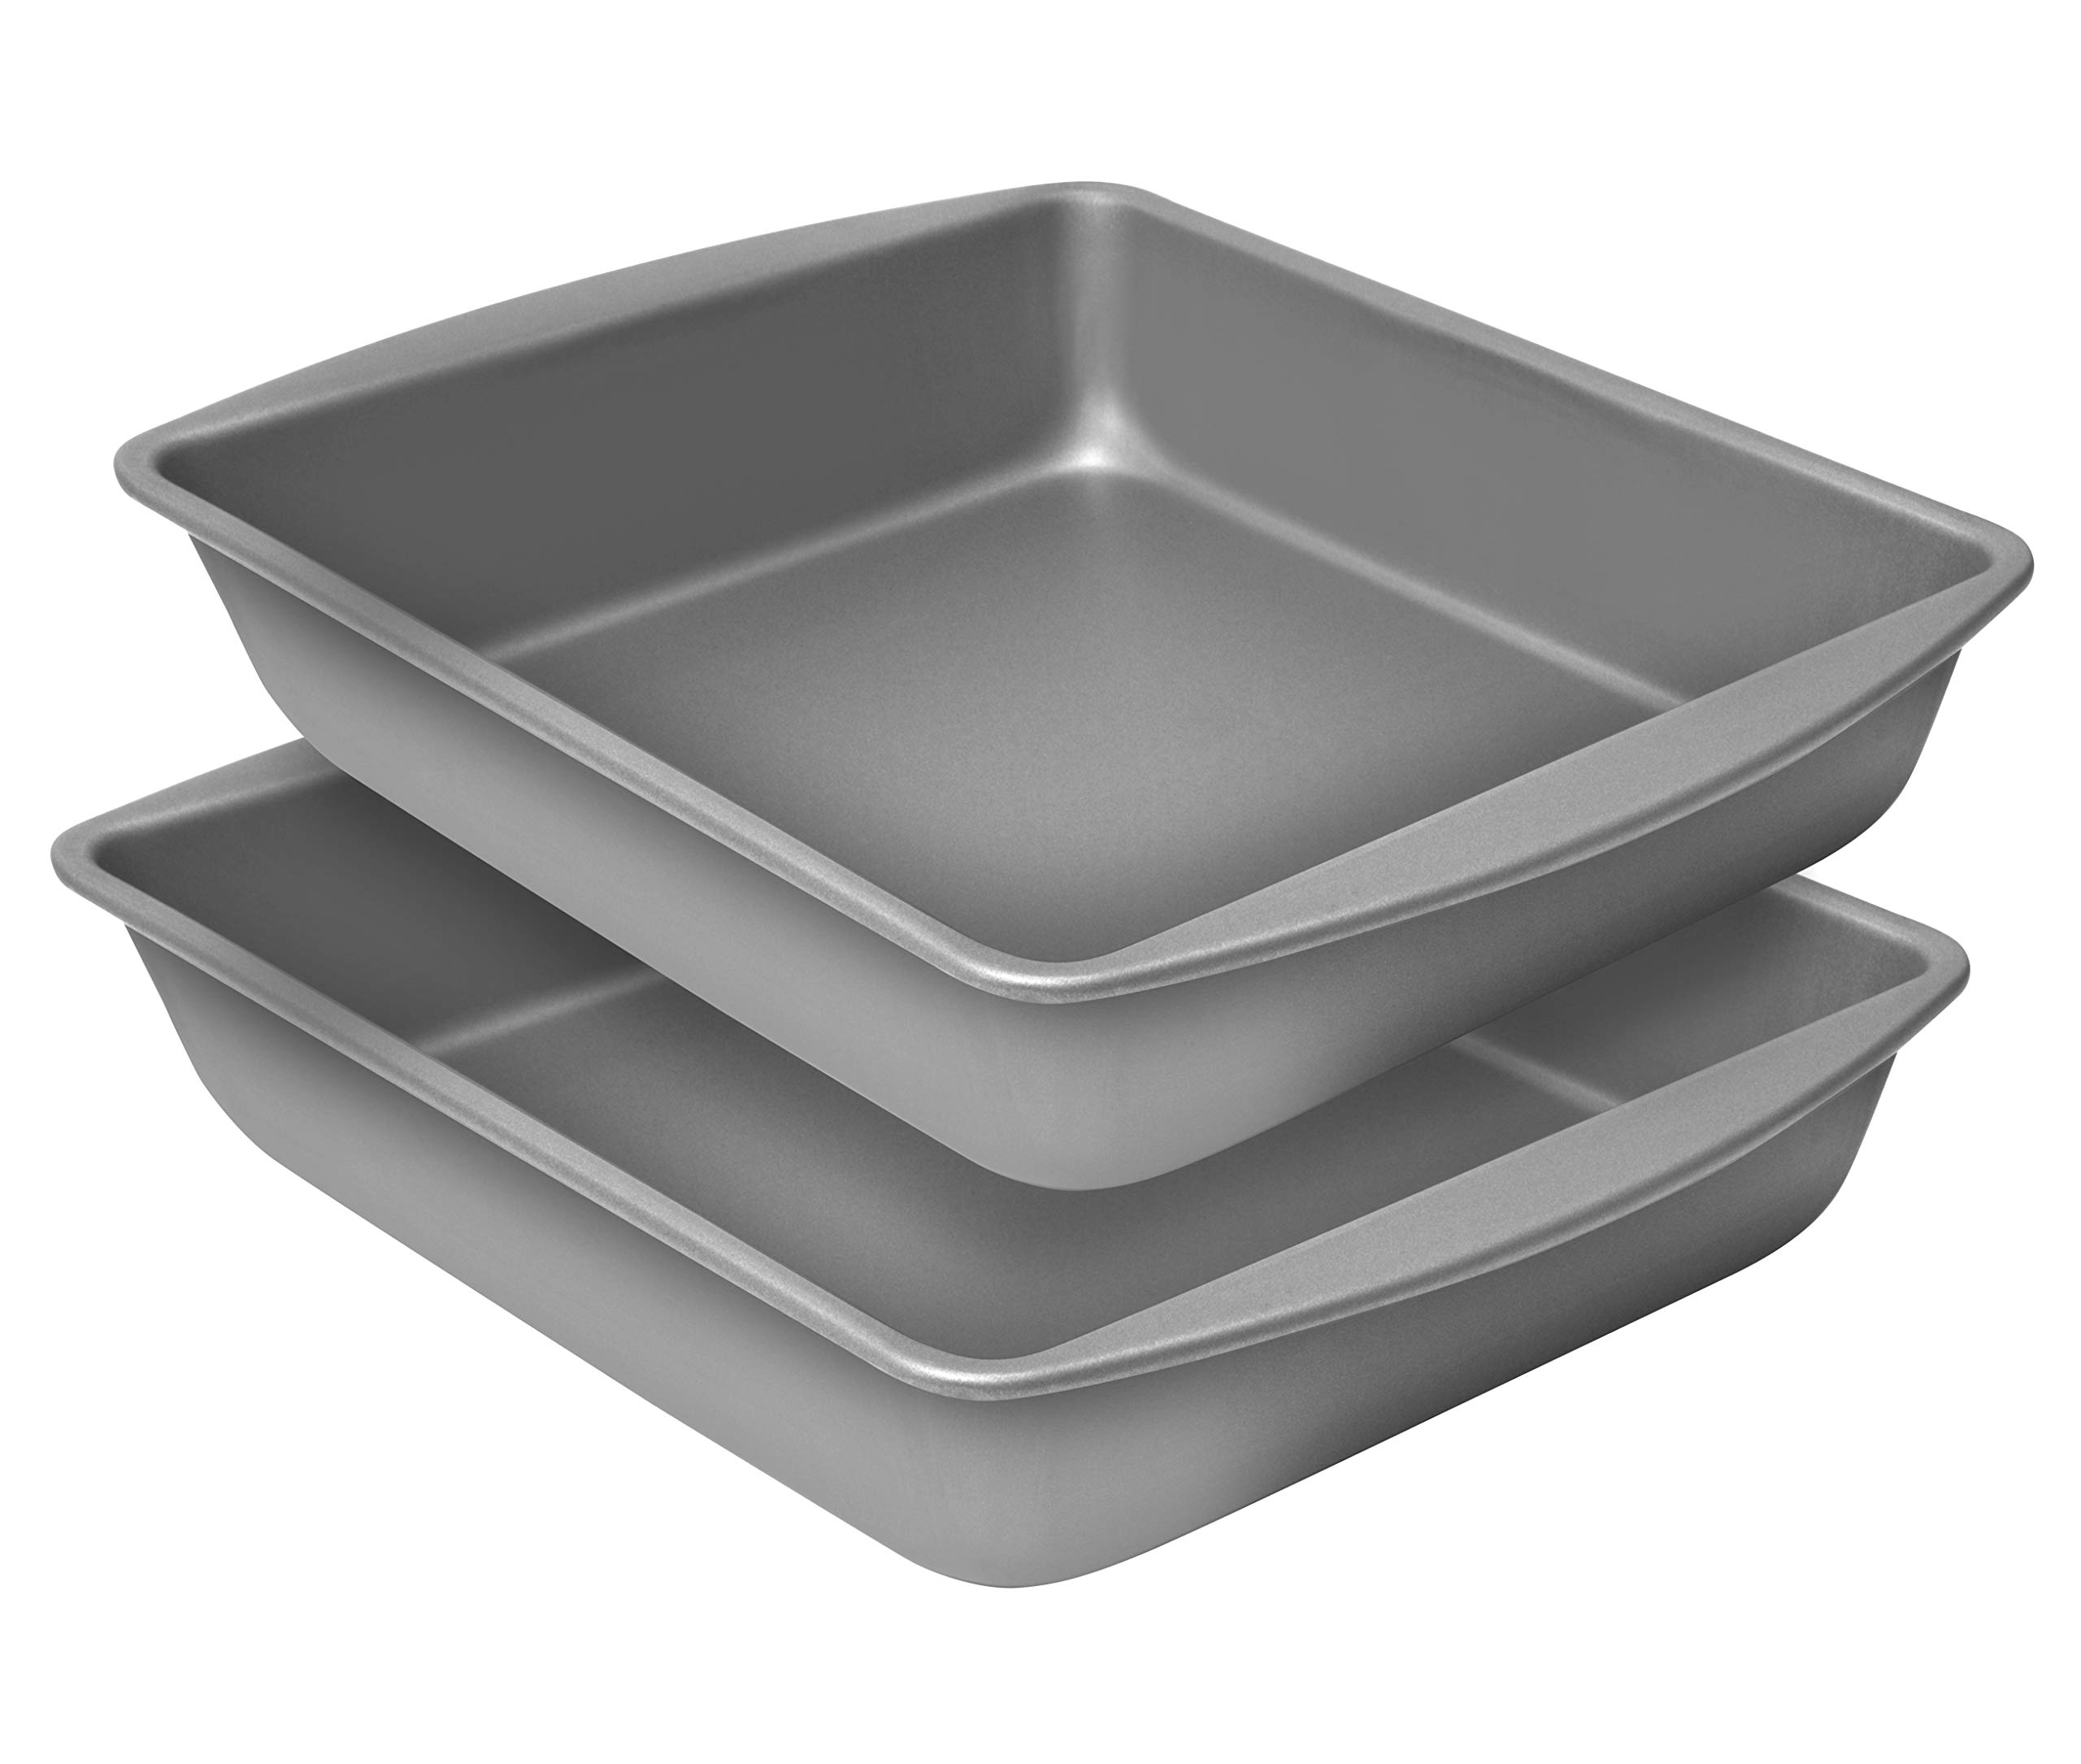 G & S Metal Products Company Baker Eze 9" Square Cake Pan, Set of 2